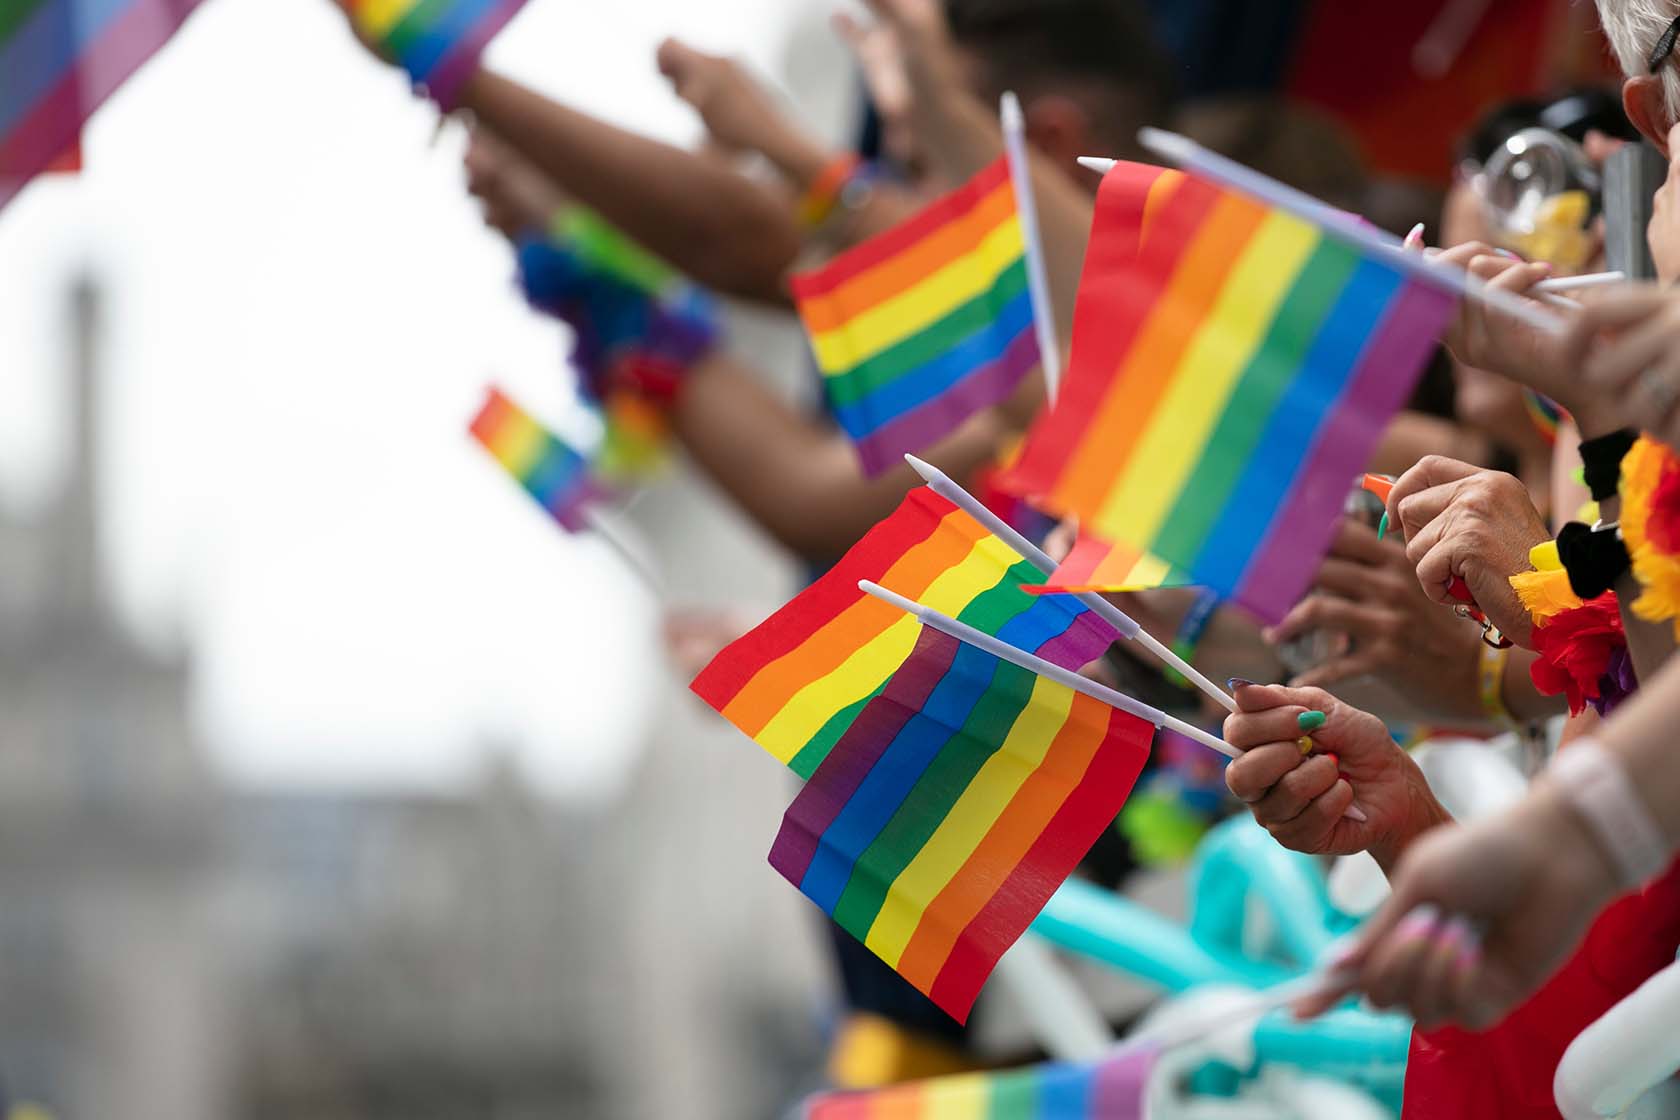 Rainbow flags being waved at a parade